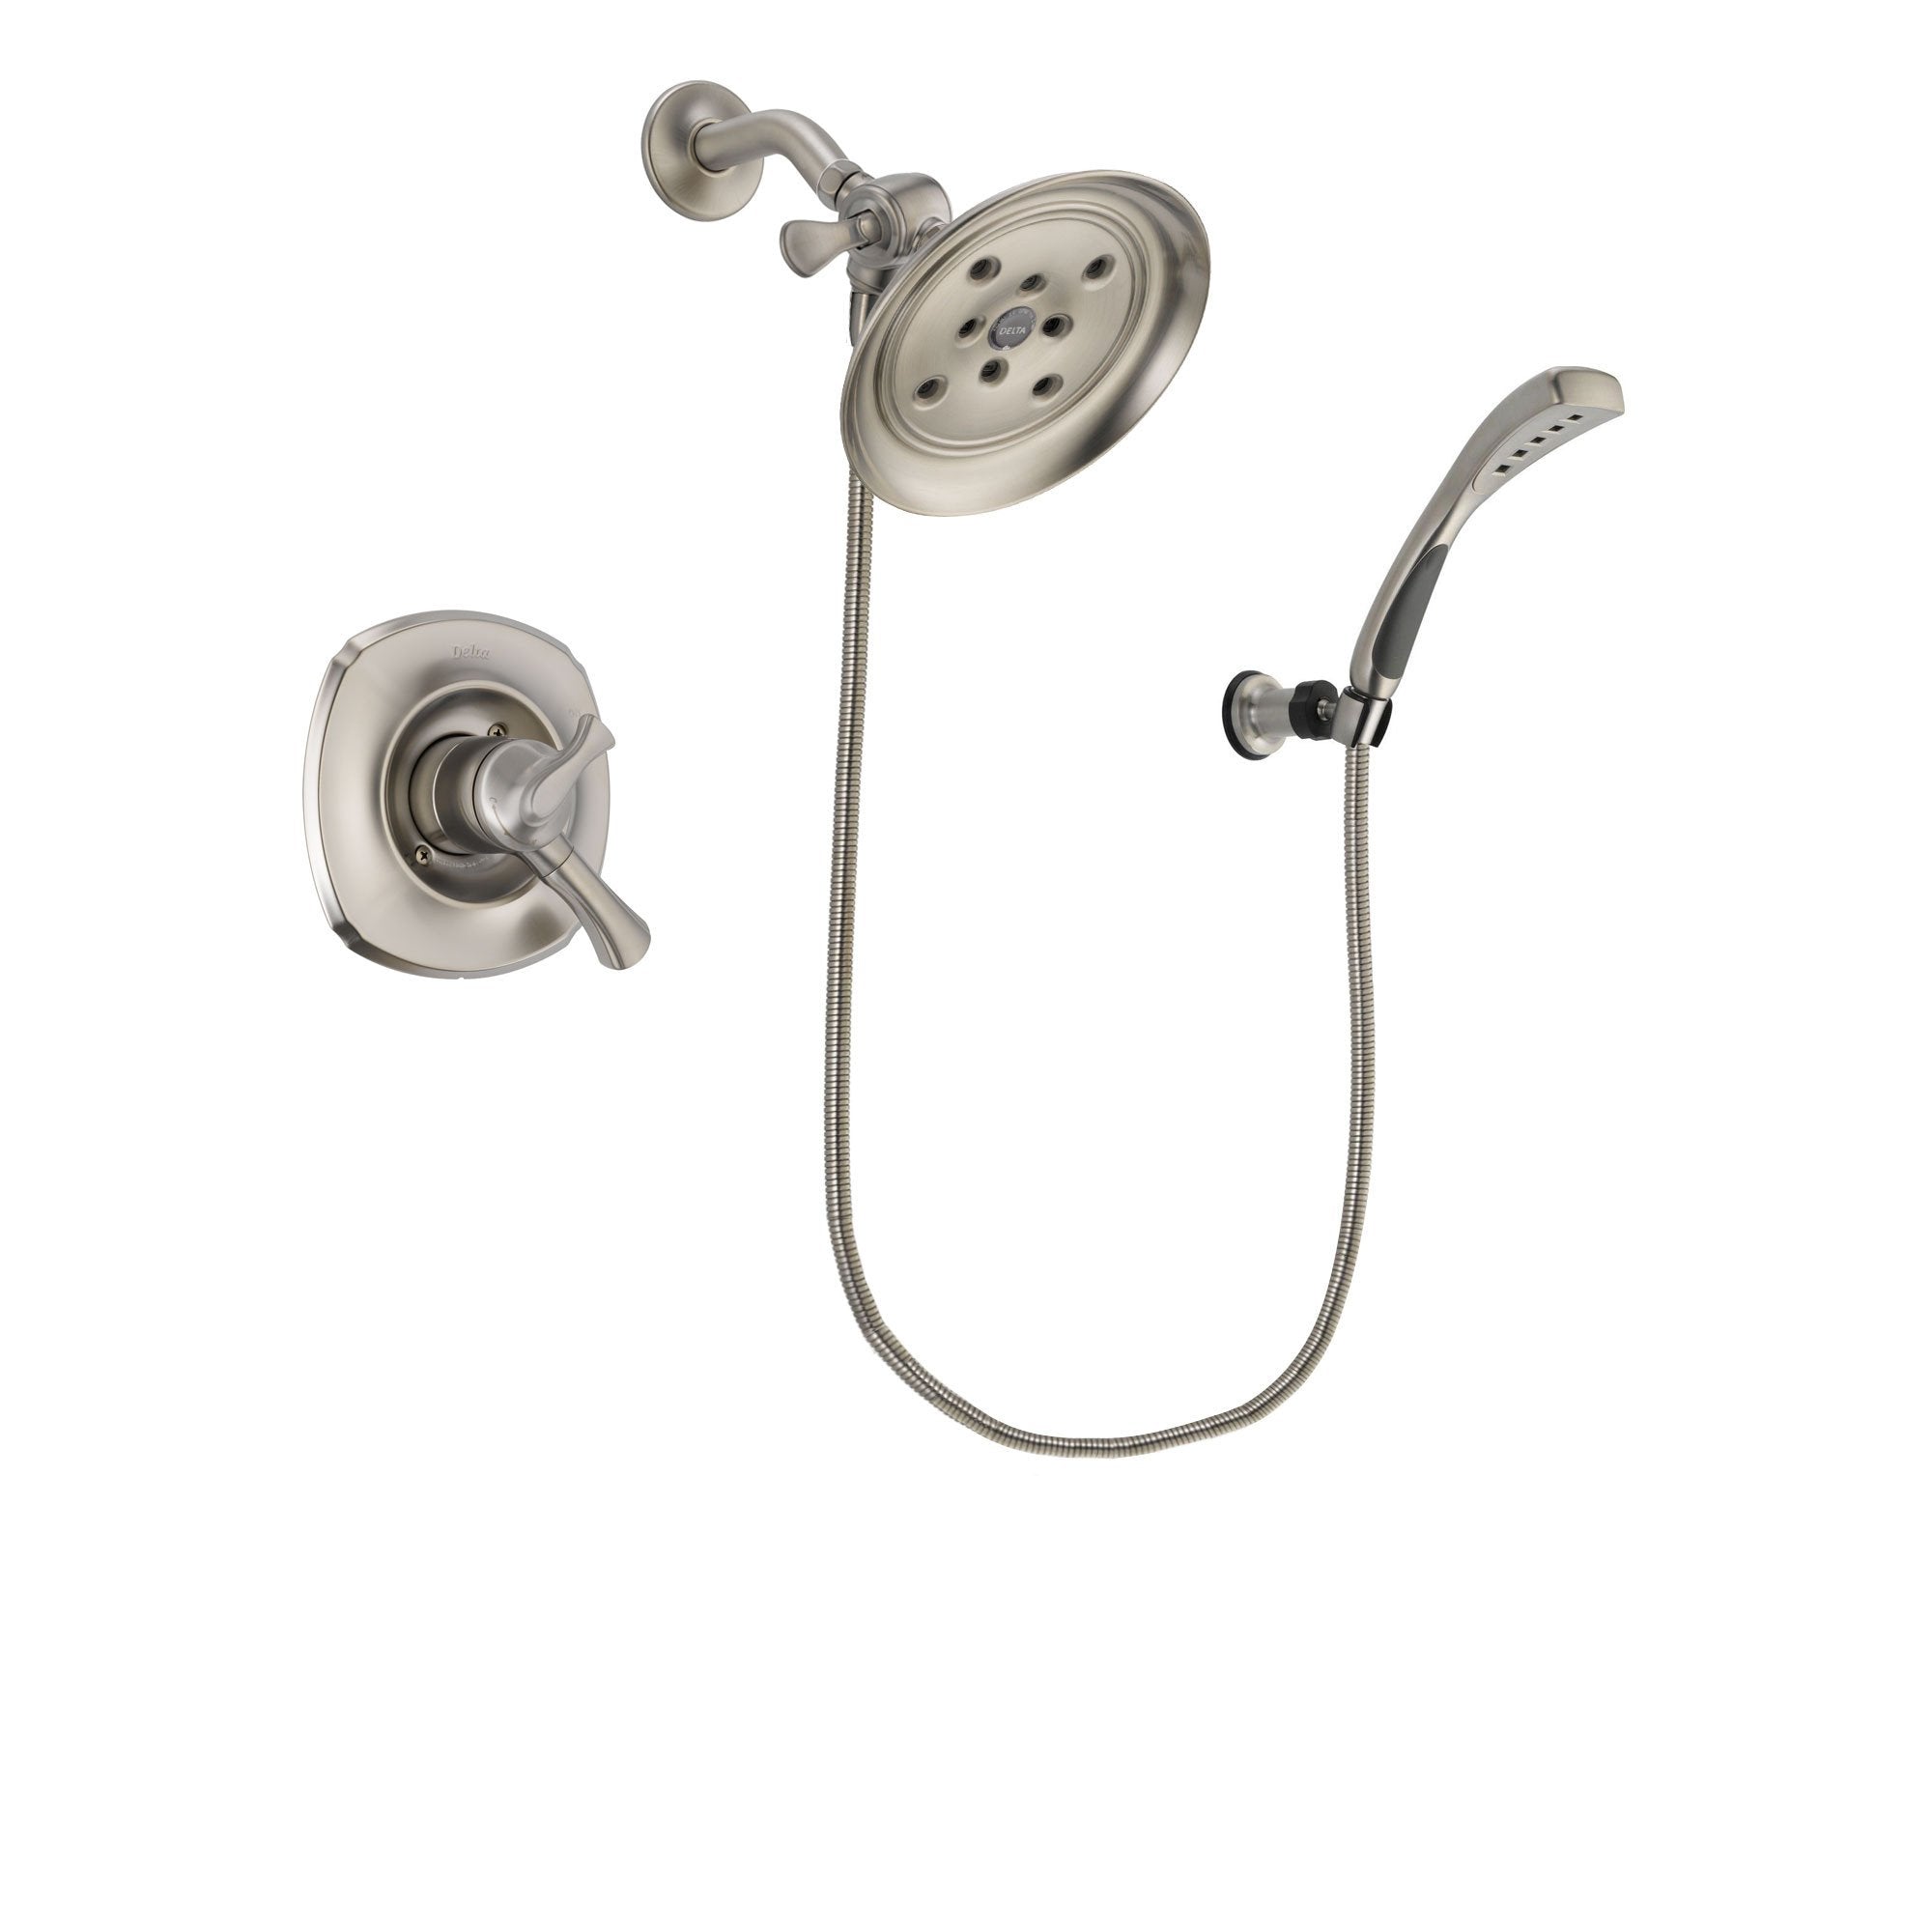 Delta Addison Stainless Steel Finish Dual Control Shower Faucet System Package with Large Rain Showerhead and Wall Mounted Handshower Includes Rough-in Valve DSP1882V